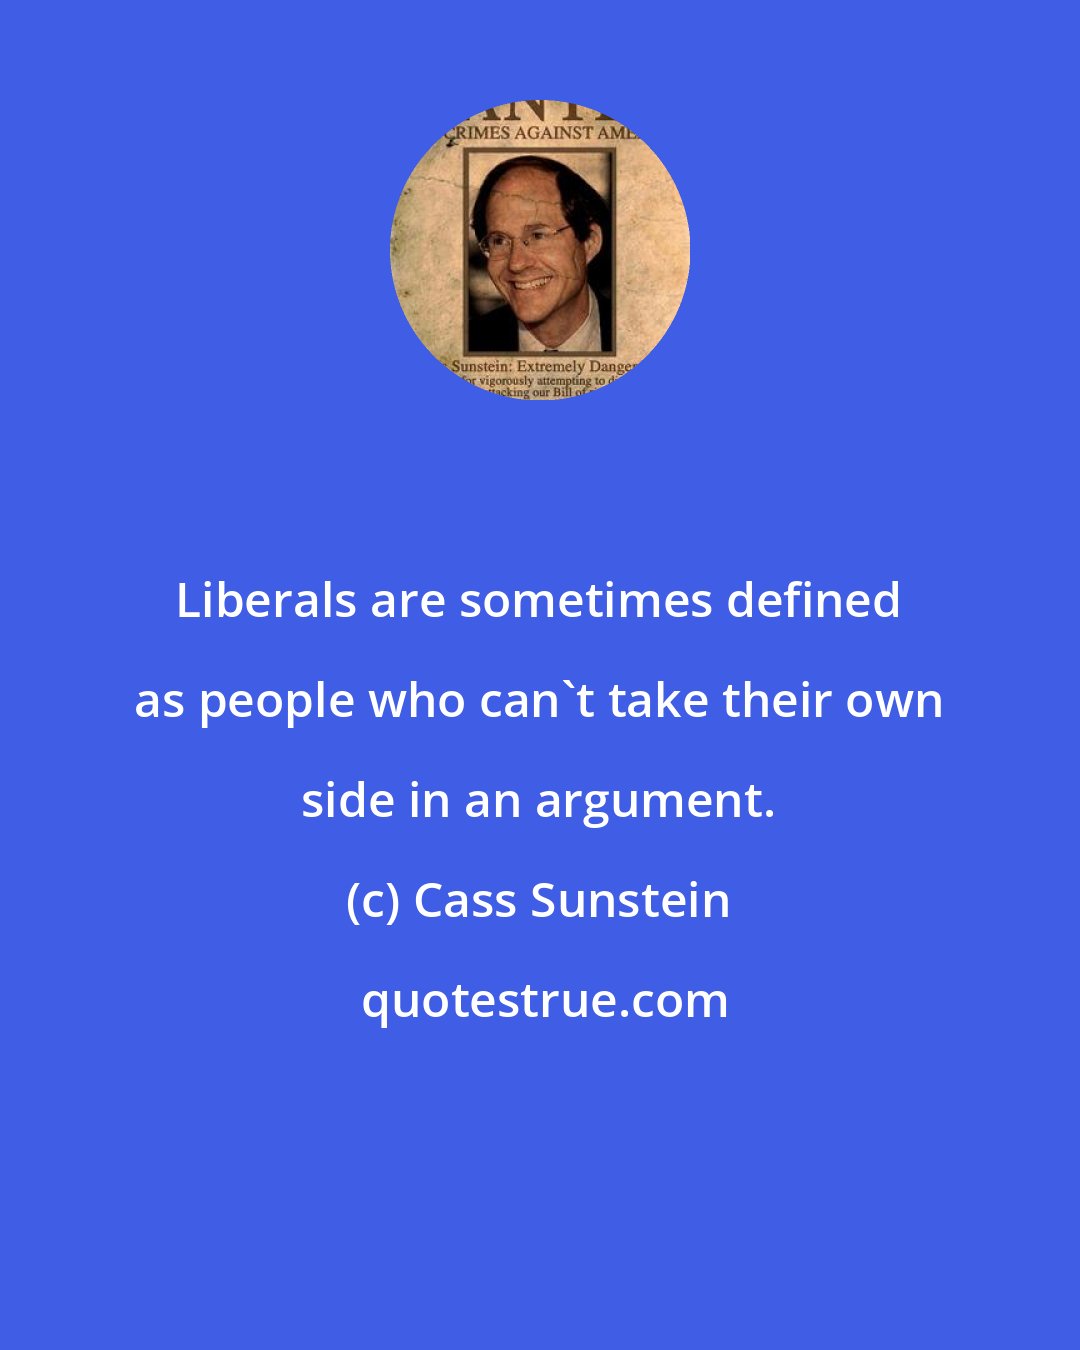 Cass Sunstein: Liberals are sometimes defined as people who can't take their own side in an argument.